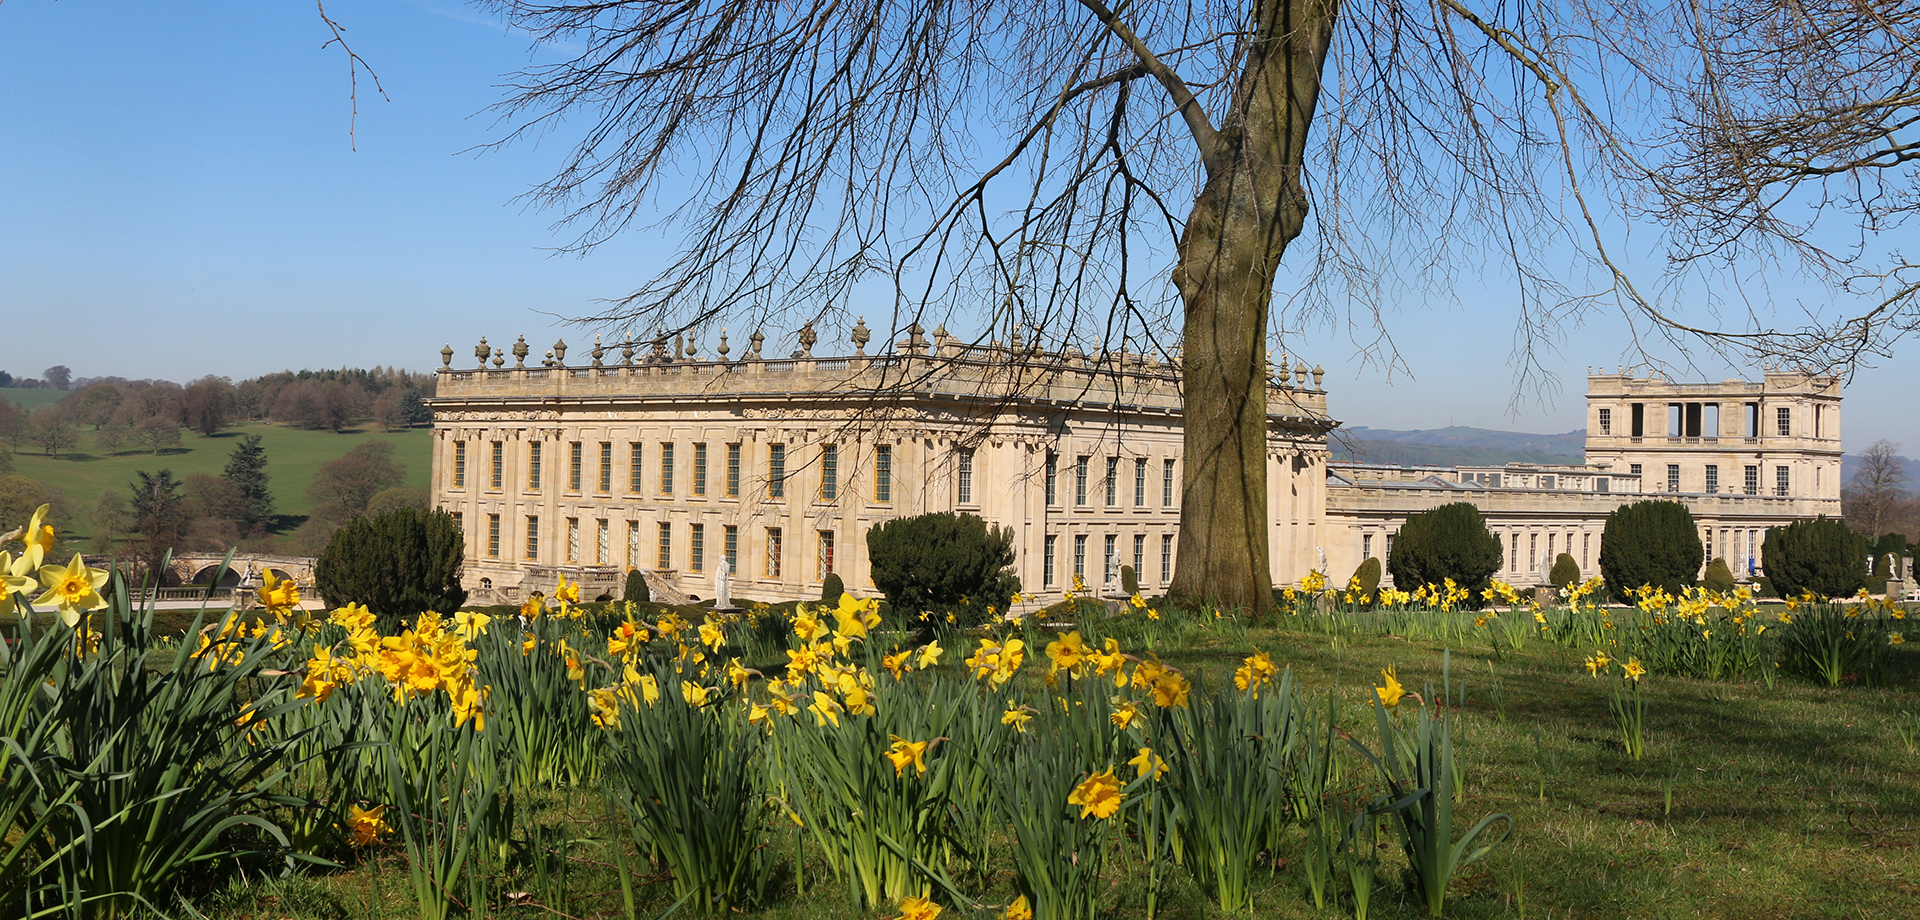 In the Chatsworth Garden: Spring is in the air